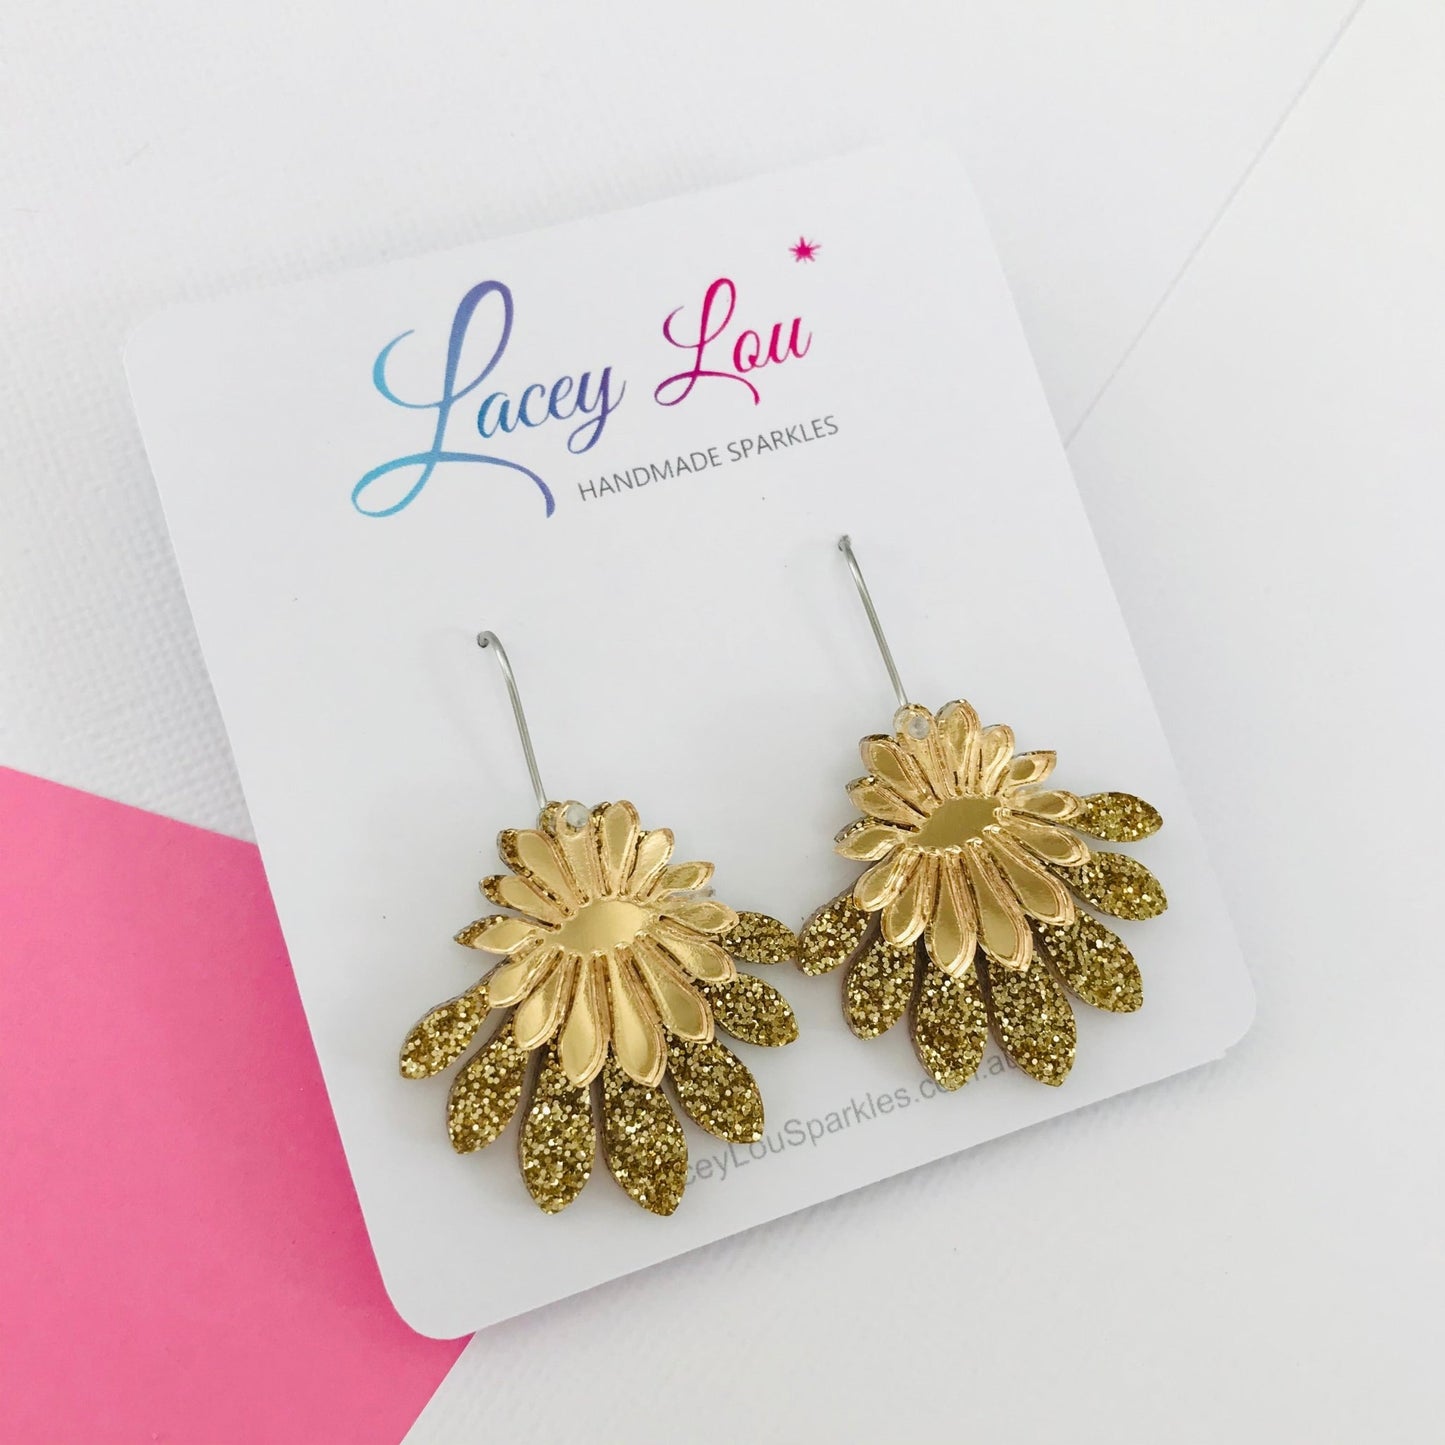 Medium Flower Frill Statement Dangle - Gold - Lacey Lou Sparkles